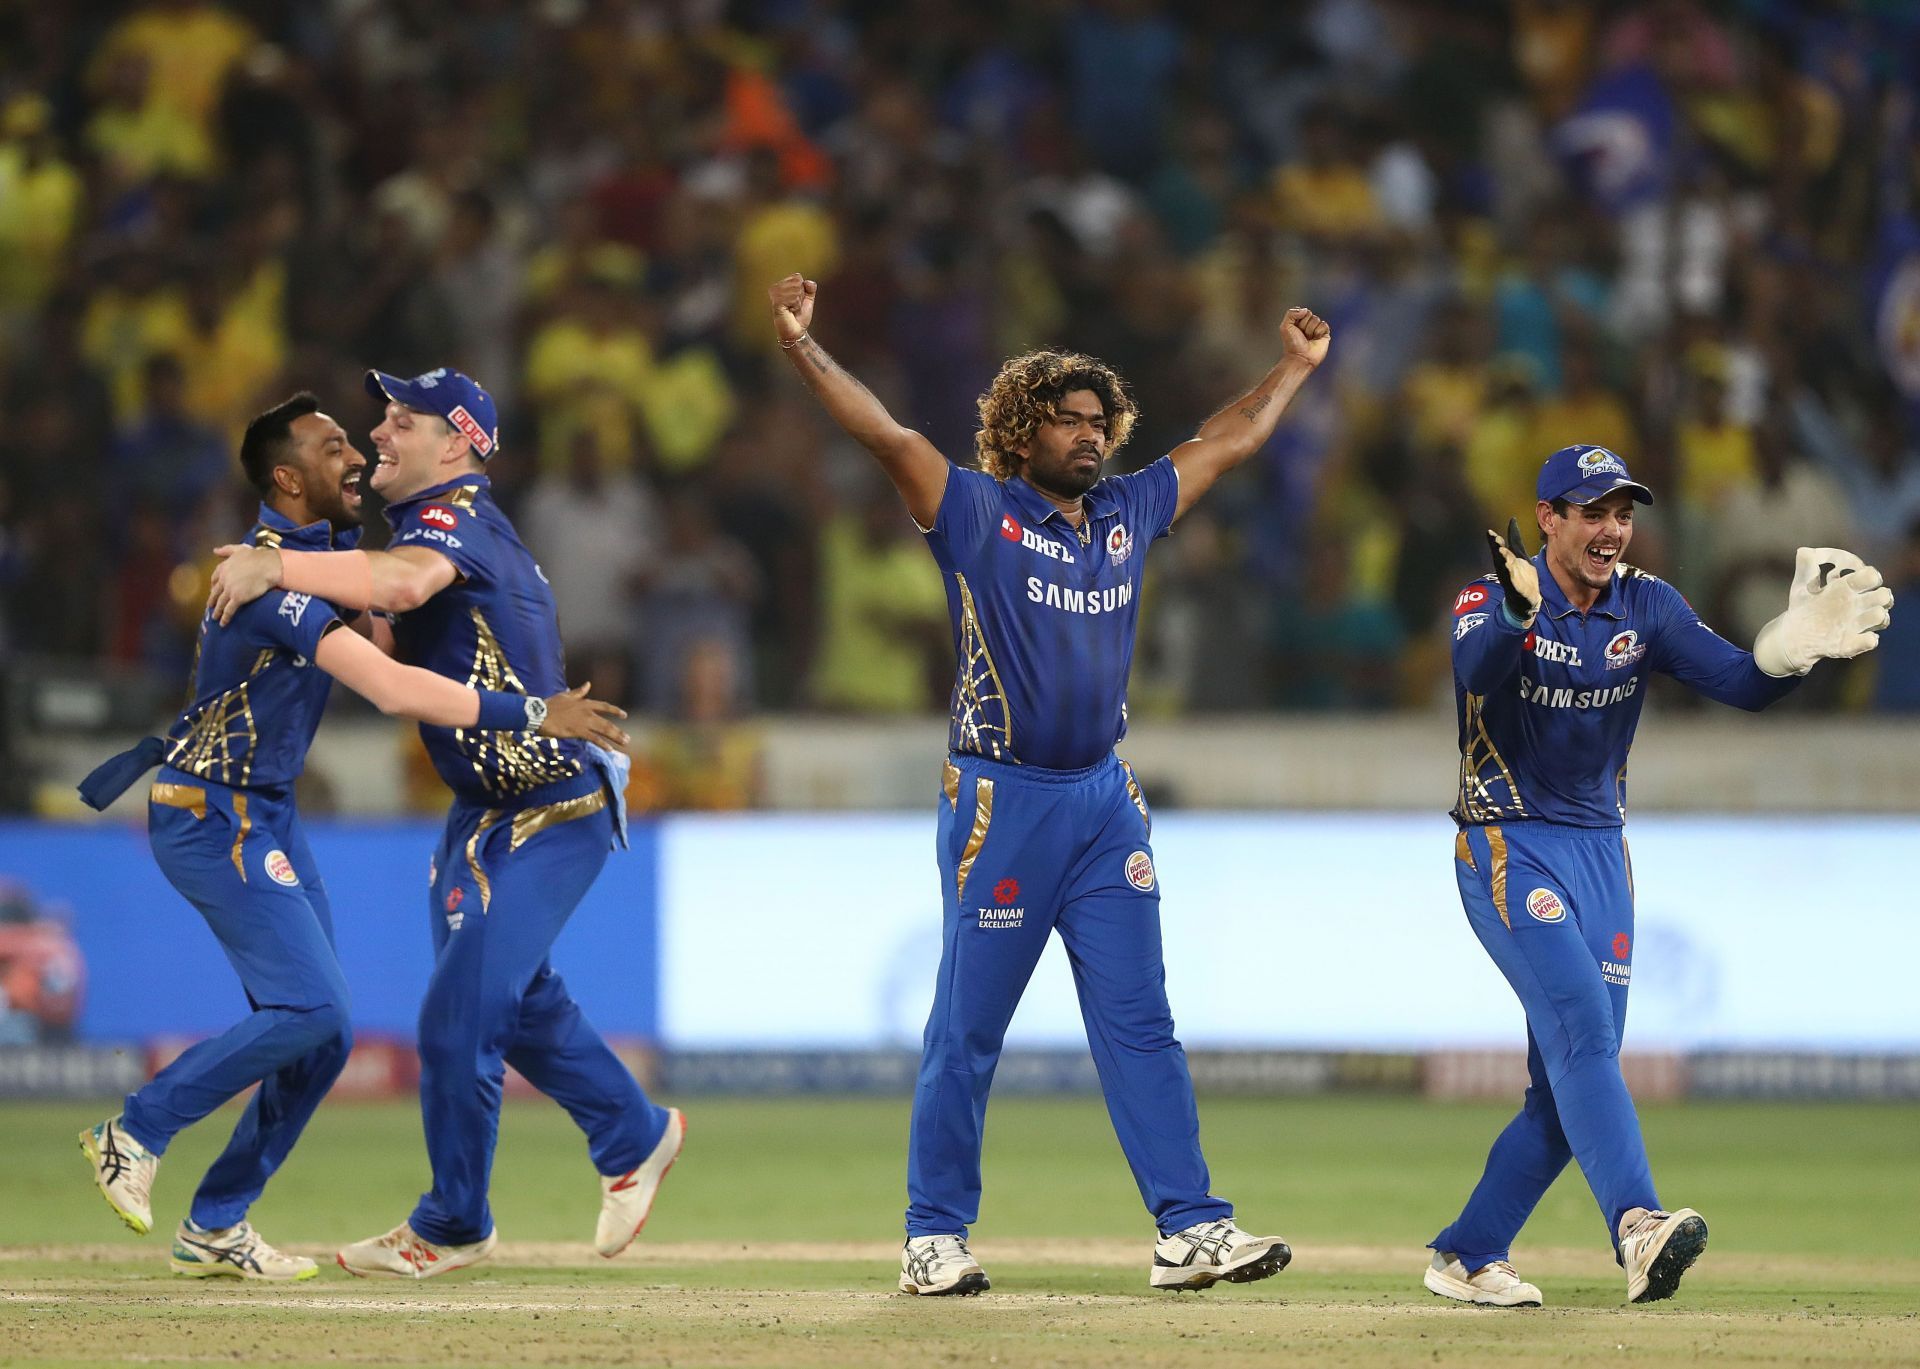 Lasith Malinga is the leading wicket-taker in the IPL. Pic: Getty Images